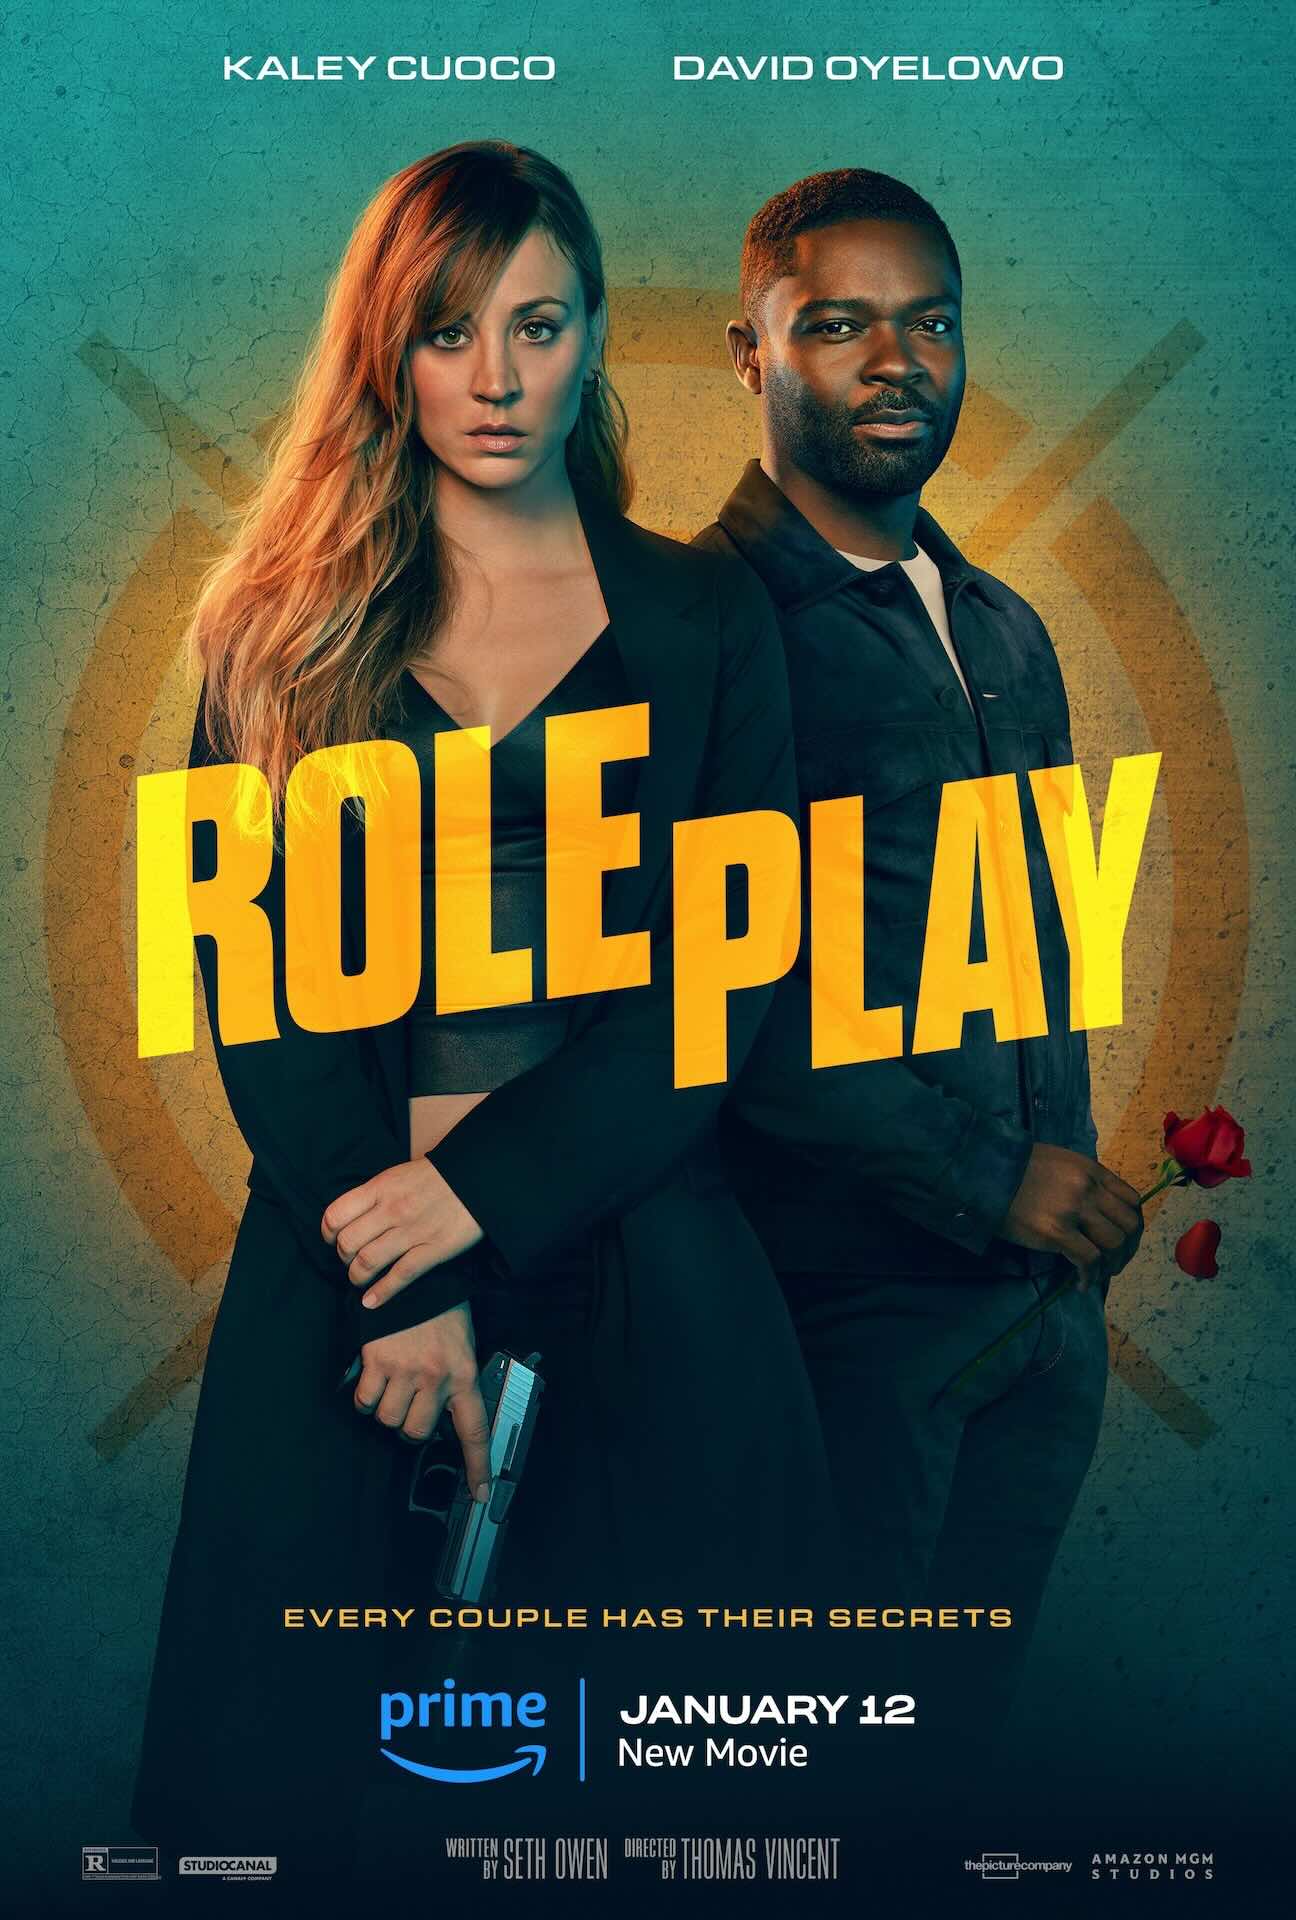 KEY ART FOR ROLE PLAY. IMAGE COURTESY OF PRIME VIDEO.